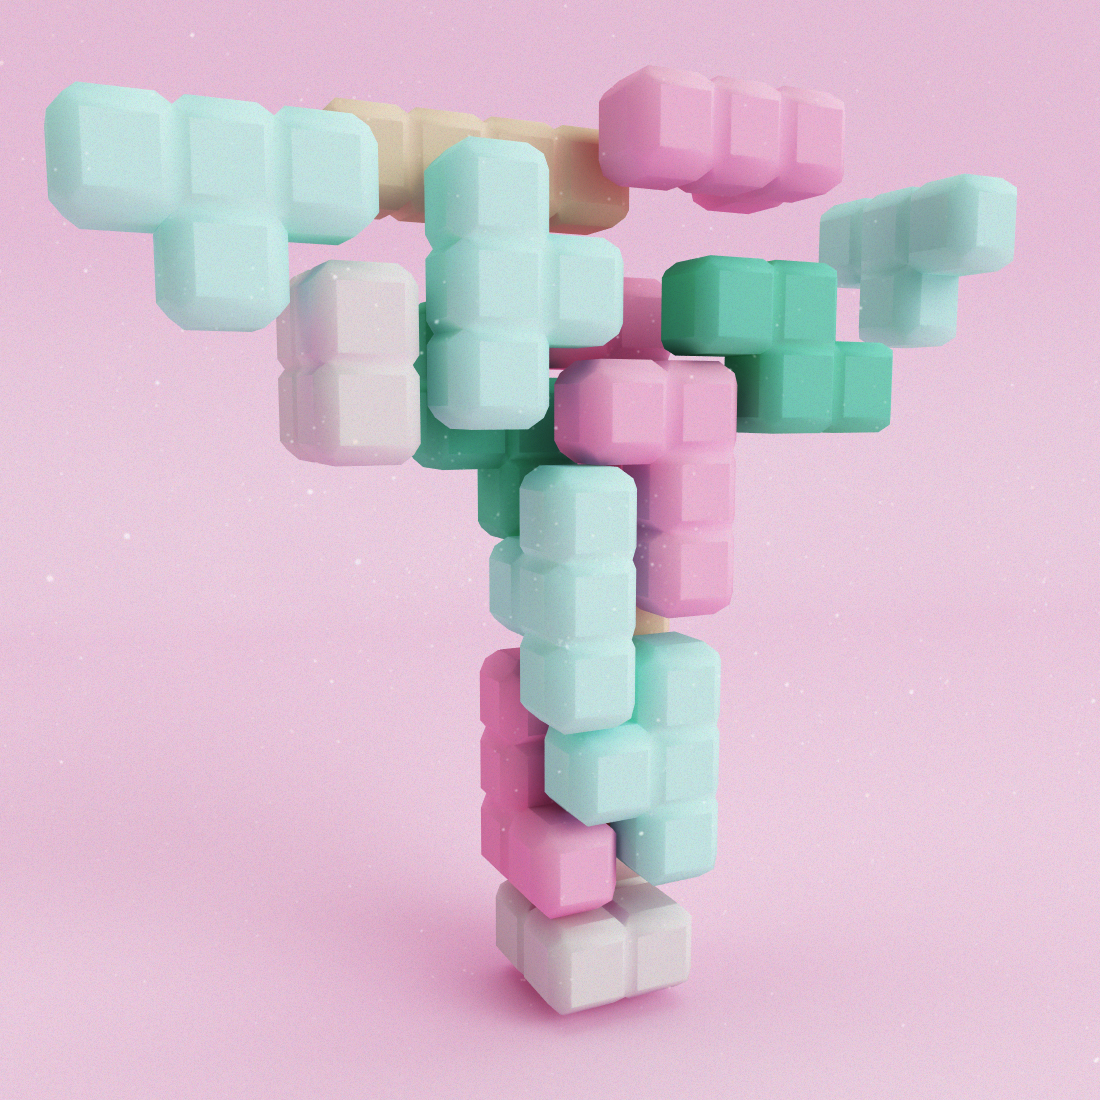 36daysoftype 3D tipografia letter lettering Cinema materiales Nube Pacman LEGO